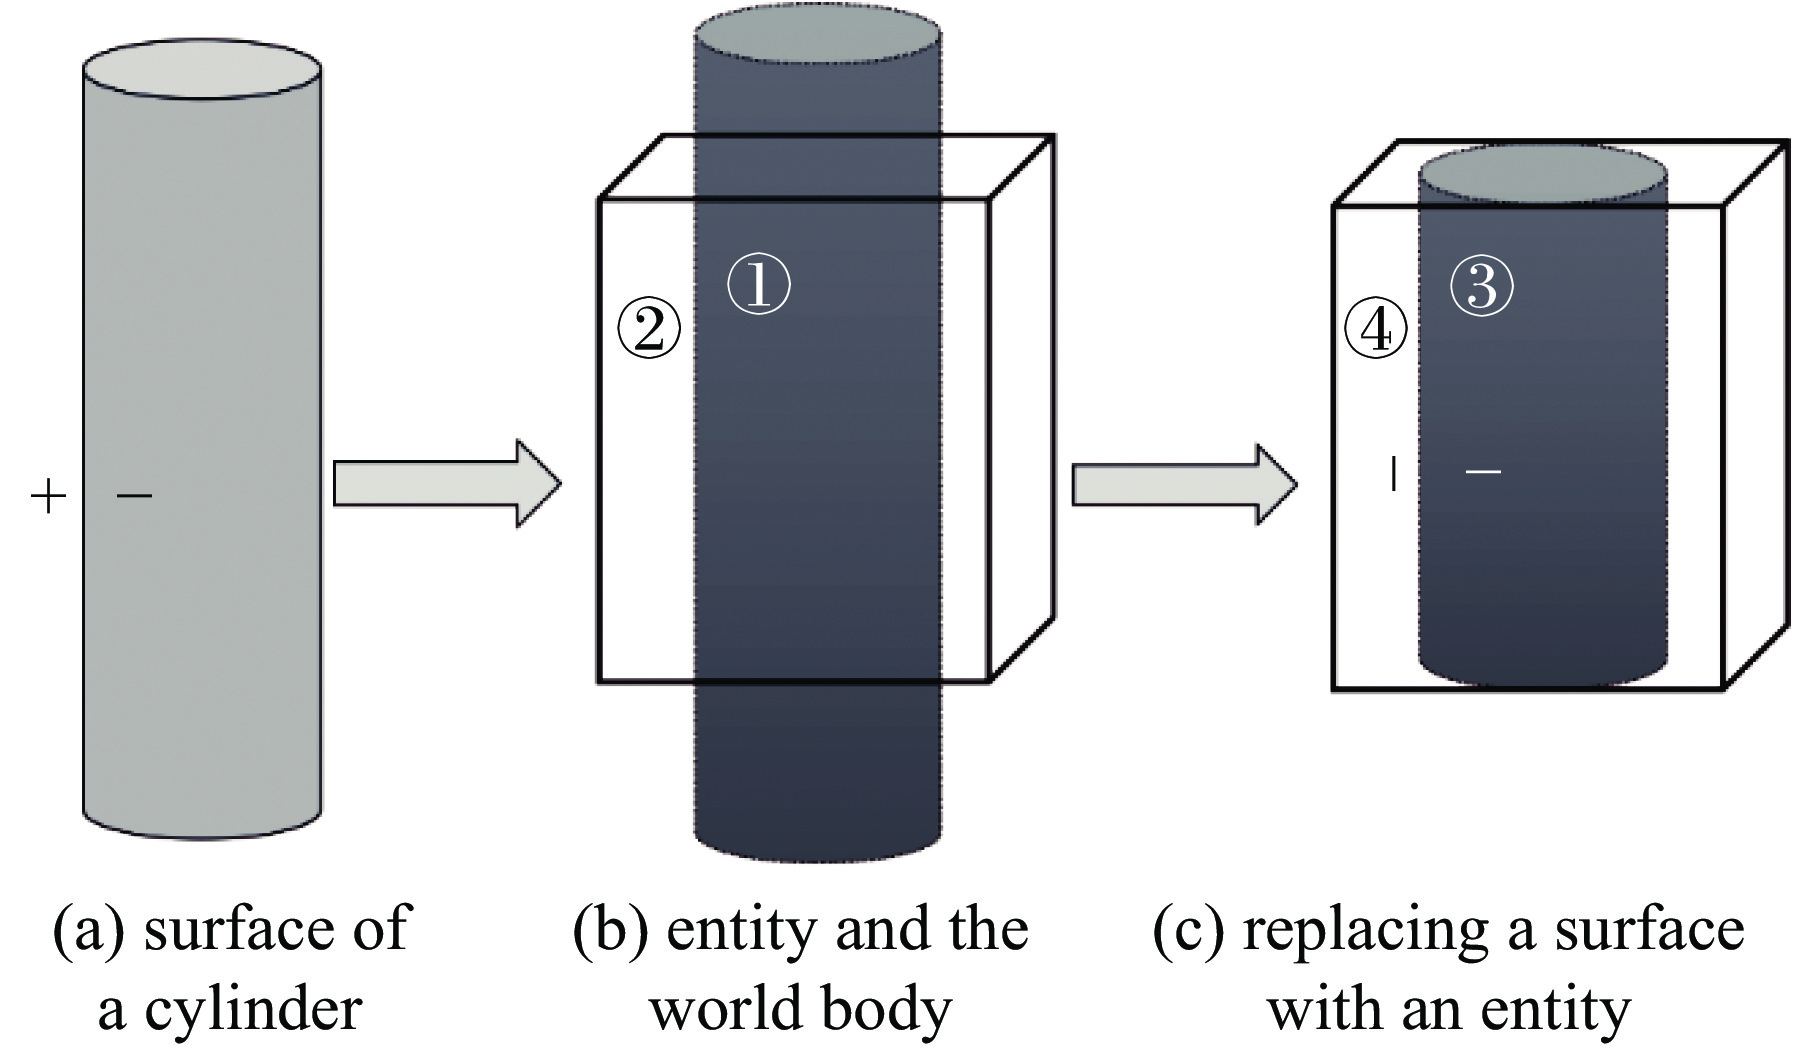 The equivalent geometry modeling method for a cylinder surface by replacing it with entities